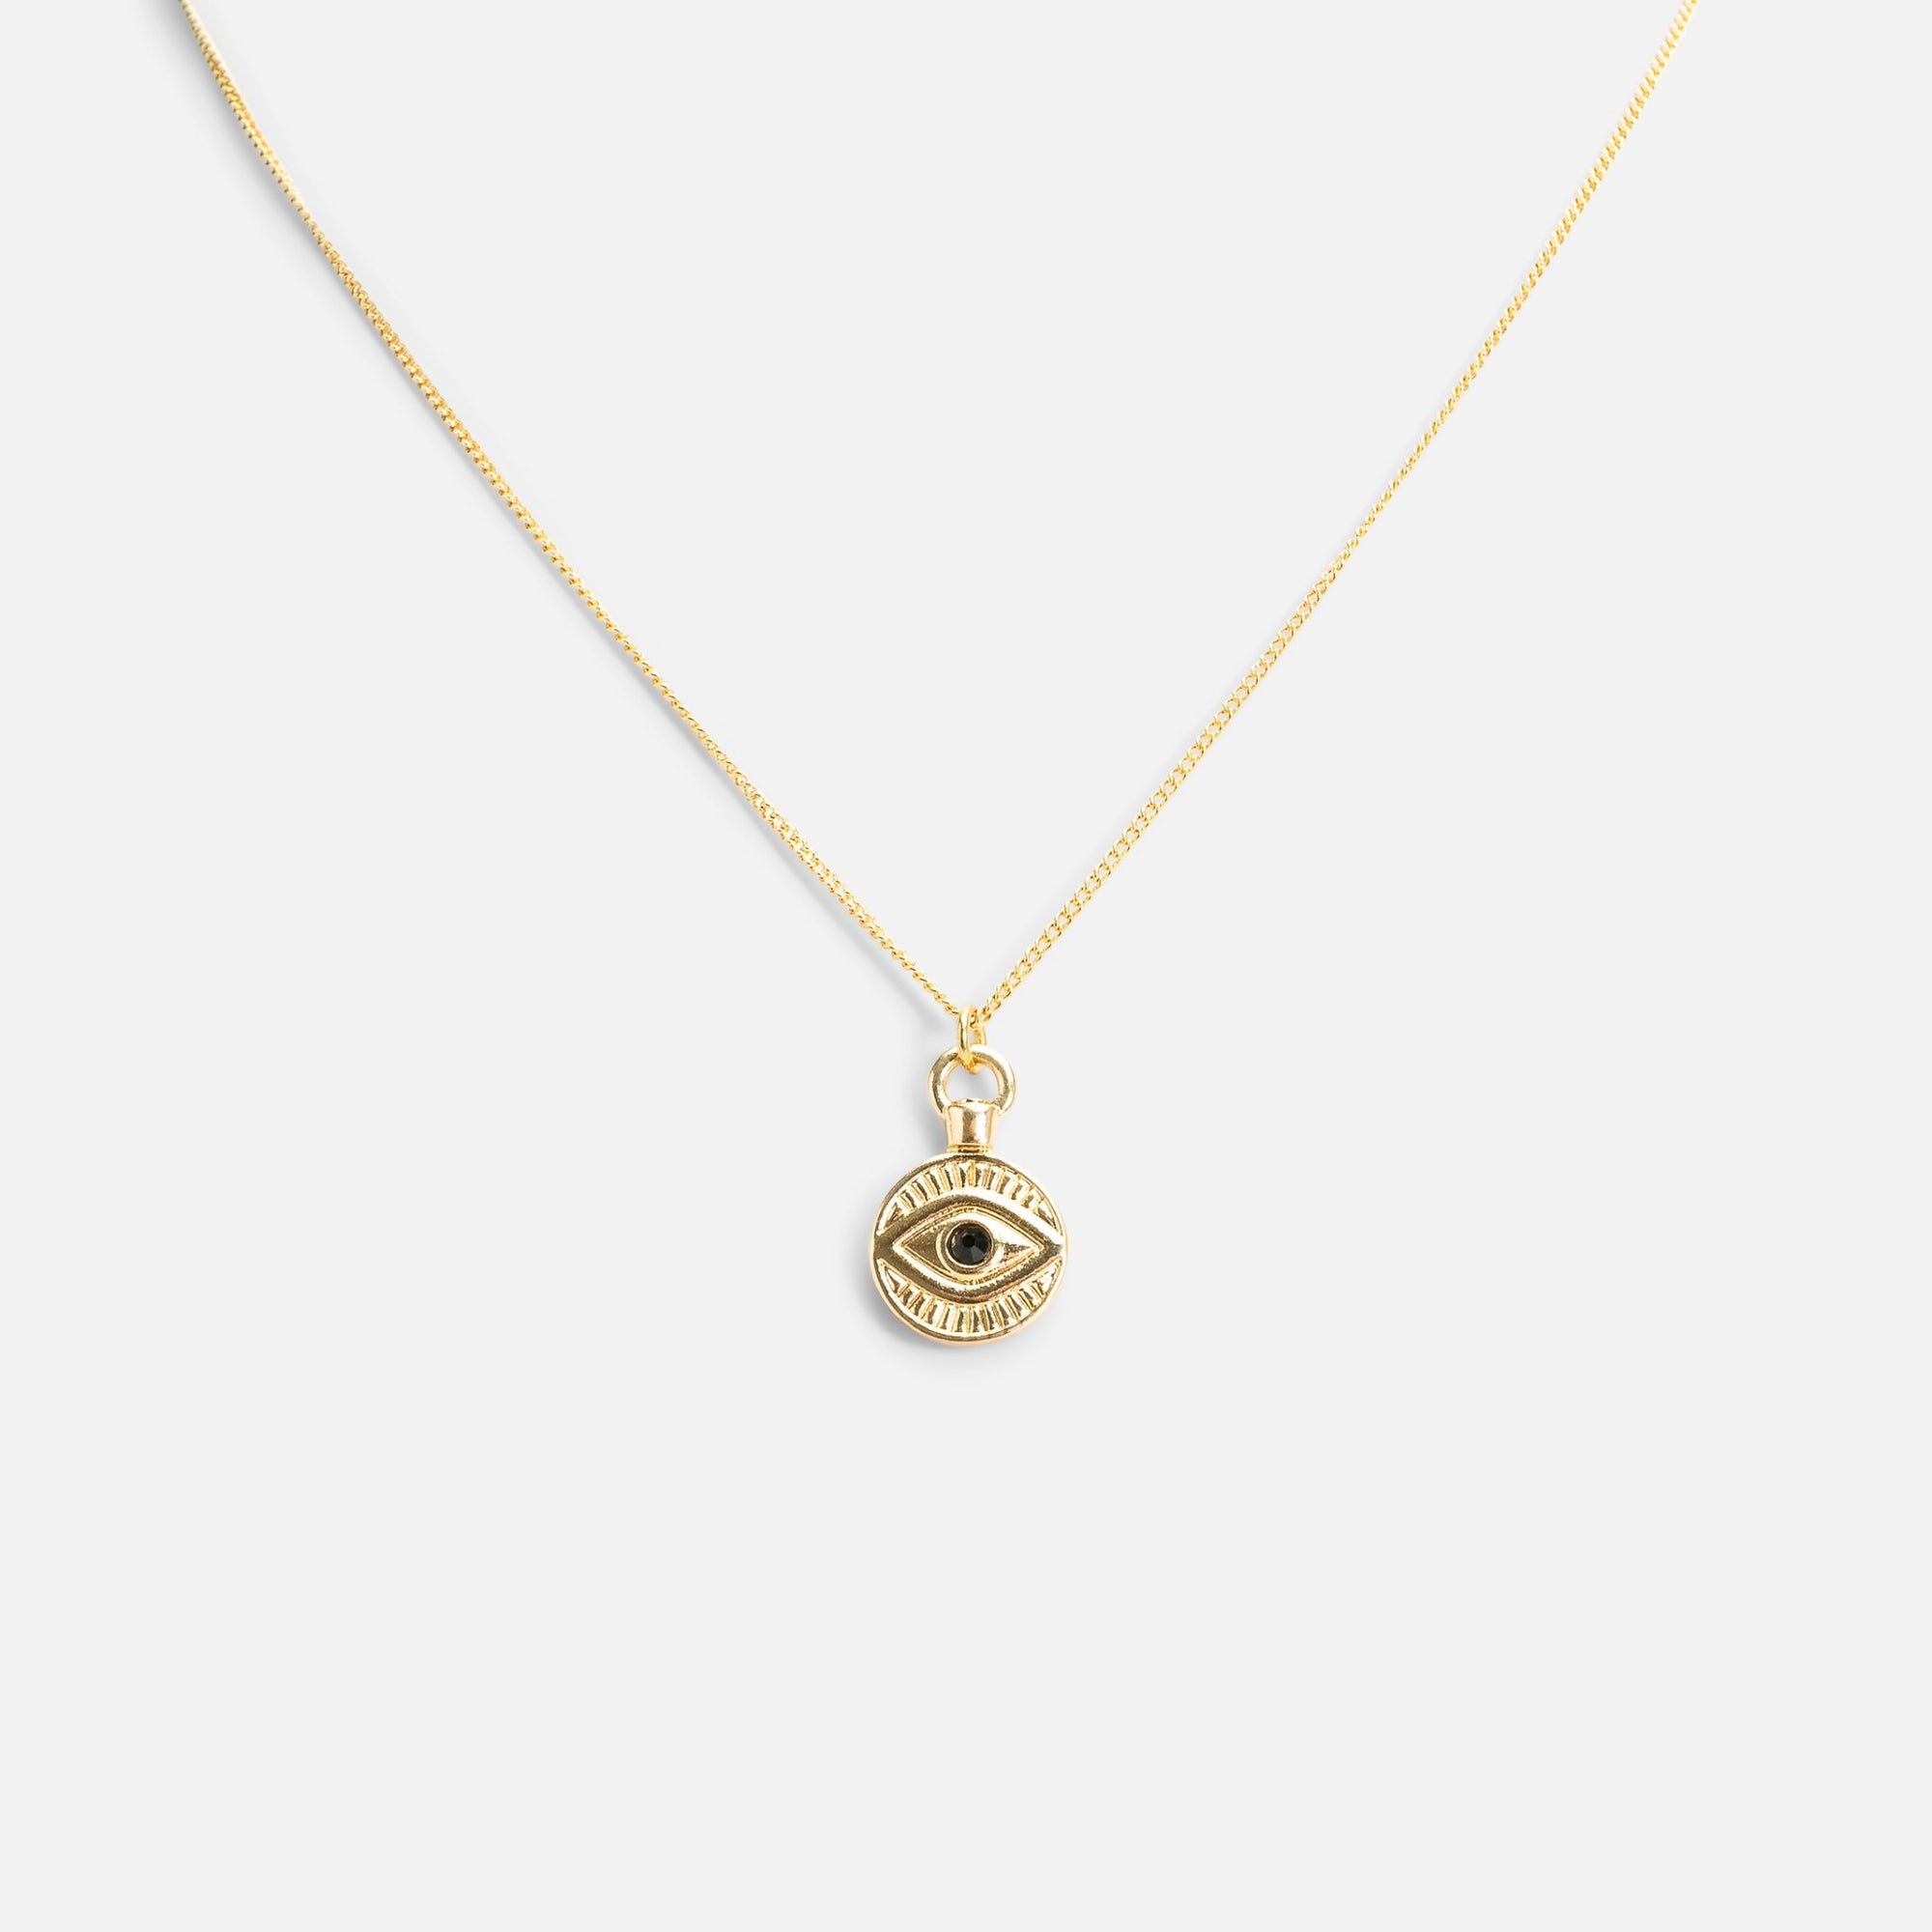 Reversible golden pendant with eye and star medallions